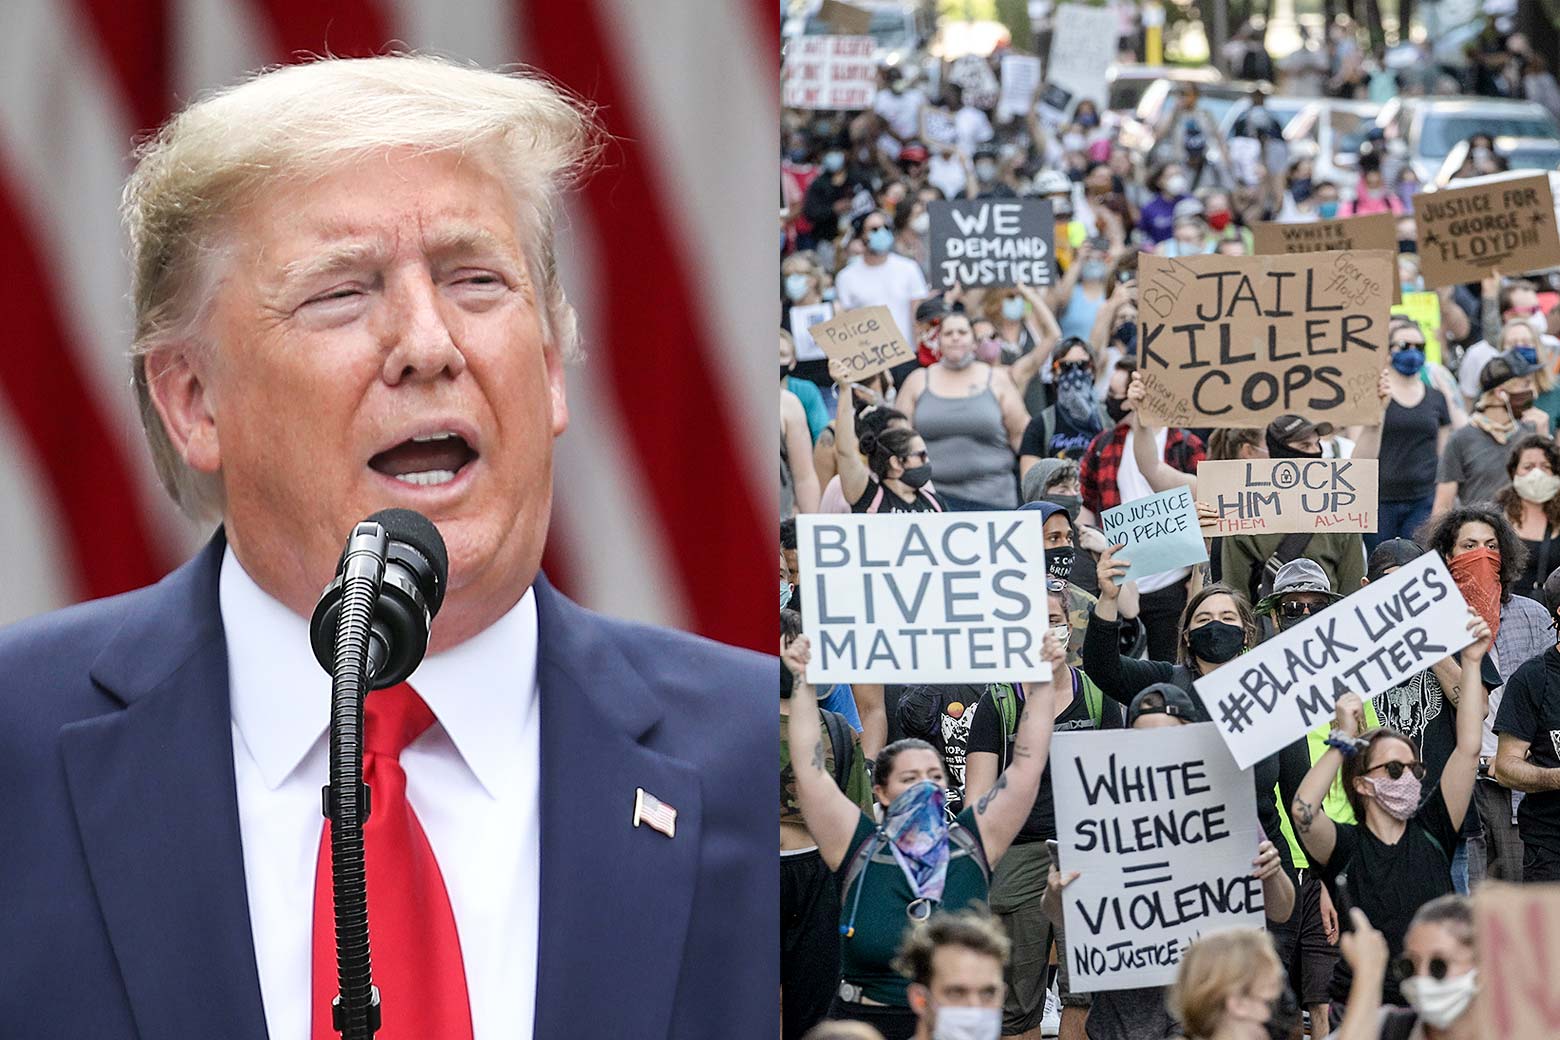 A diptych of Donald Trump speaking on the left protesters in Minnesota on the right.